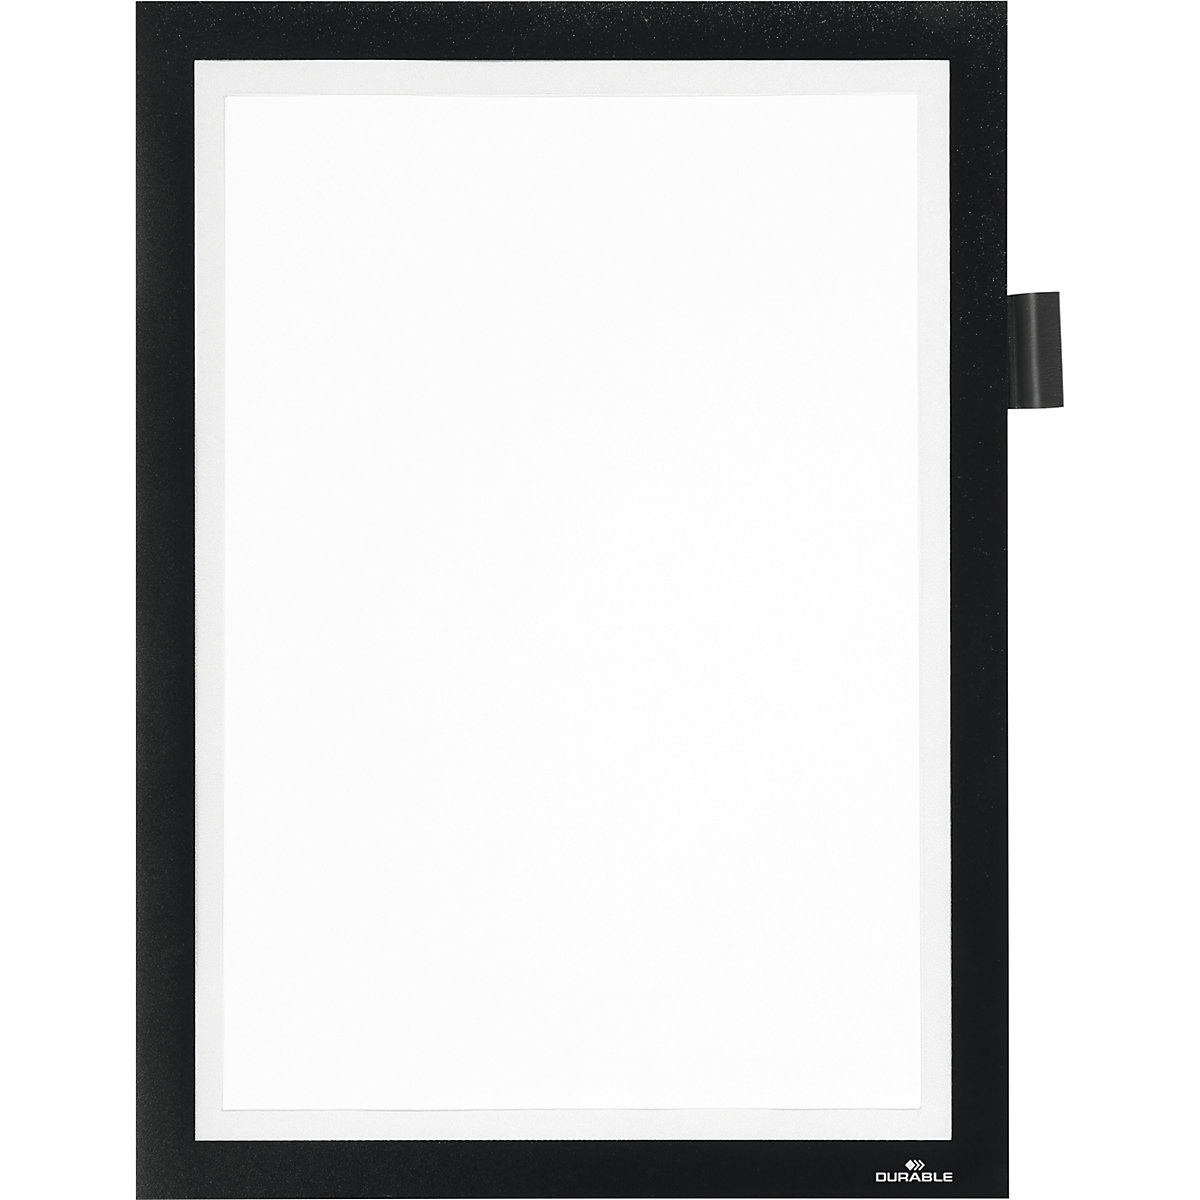 DURAFRAME® MAGNETIC NOTE A4 information frame - DURABLE